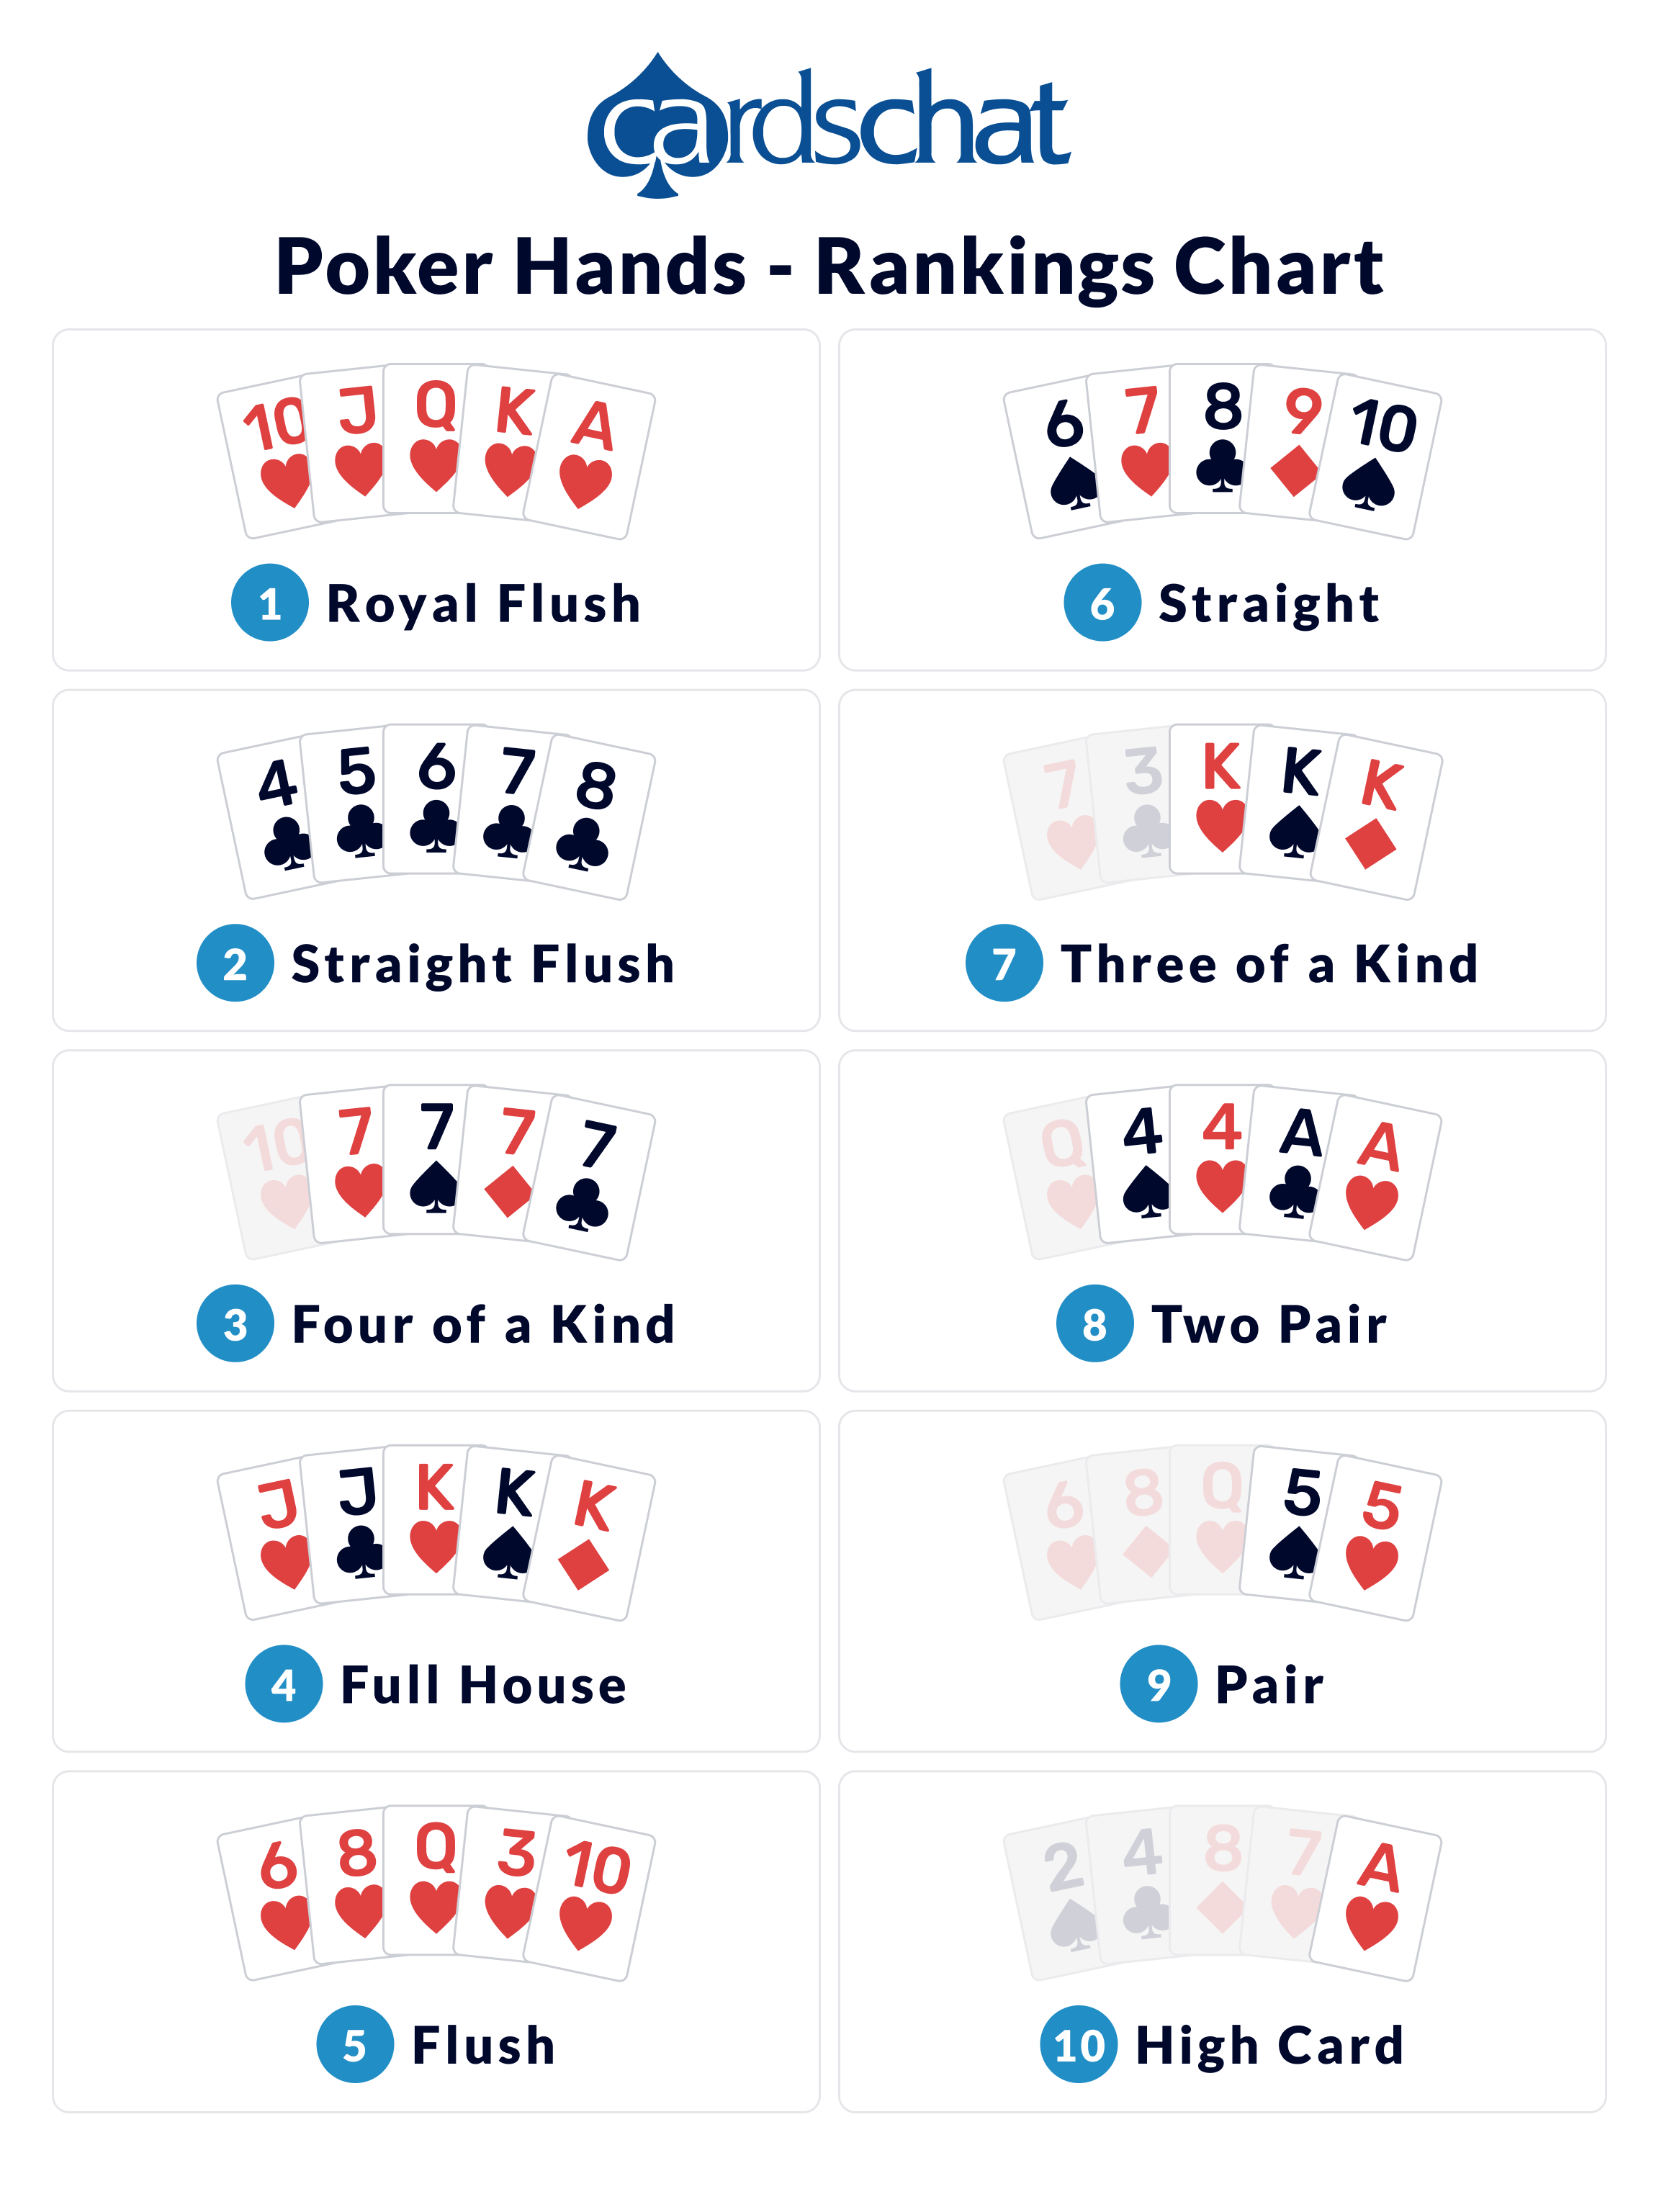 Poker Hand Rankings & Poker Hands Chart ⇛ All You Need to Know